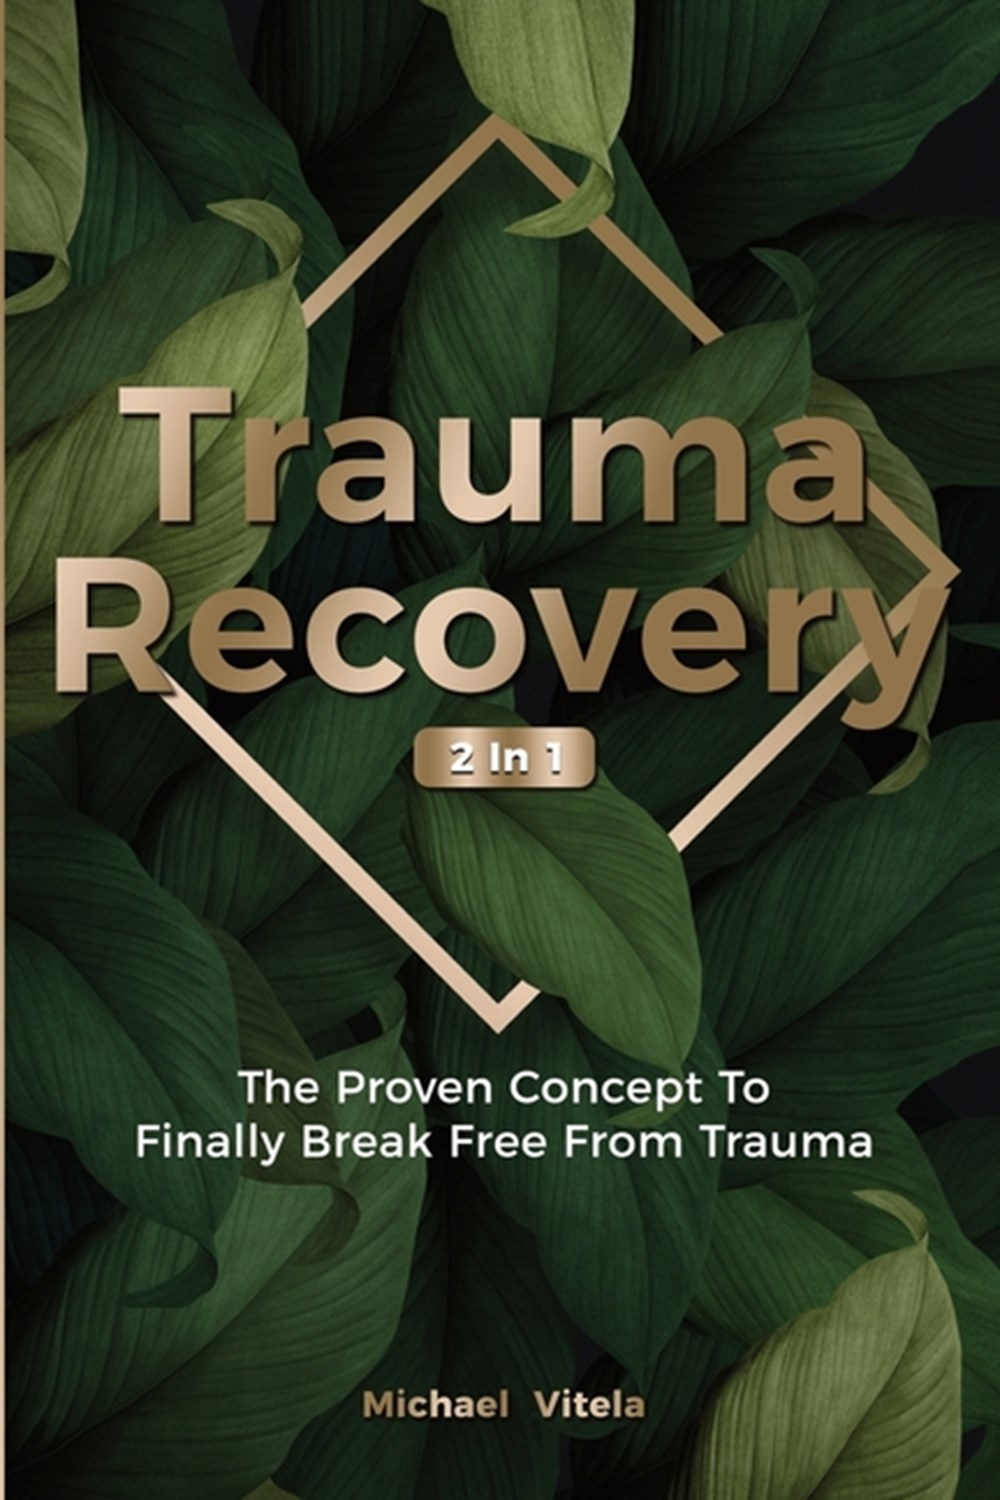 Trauma Recovery 2 In 1 The Proven Concept To Finally Break Free From Trauma